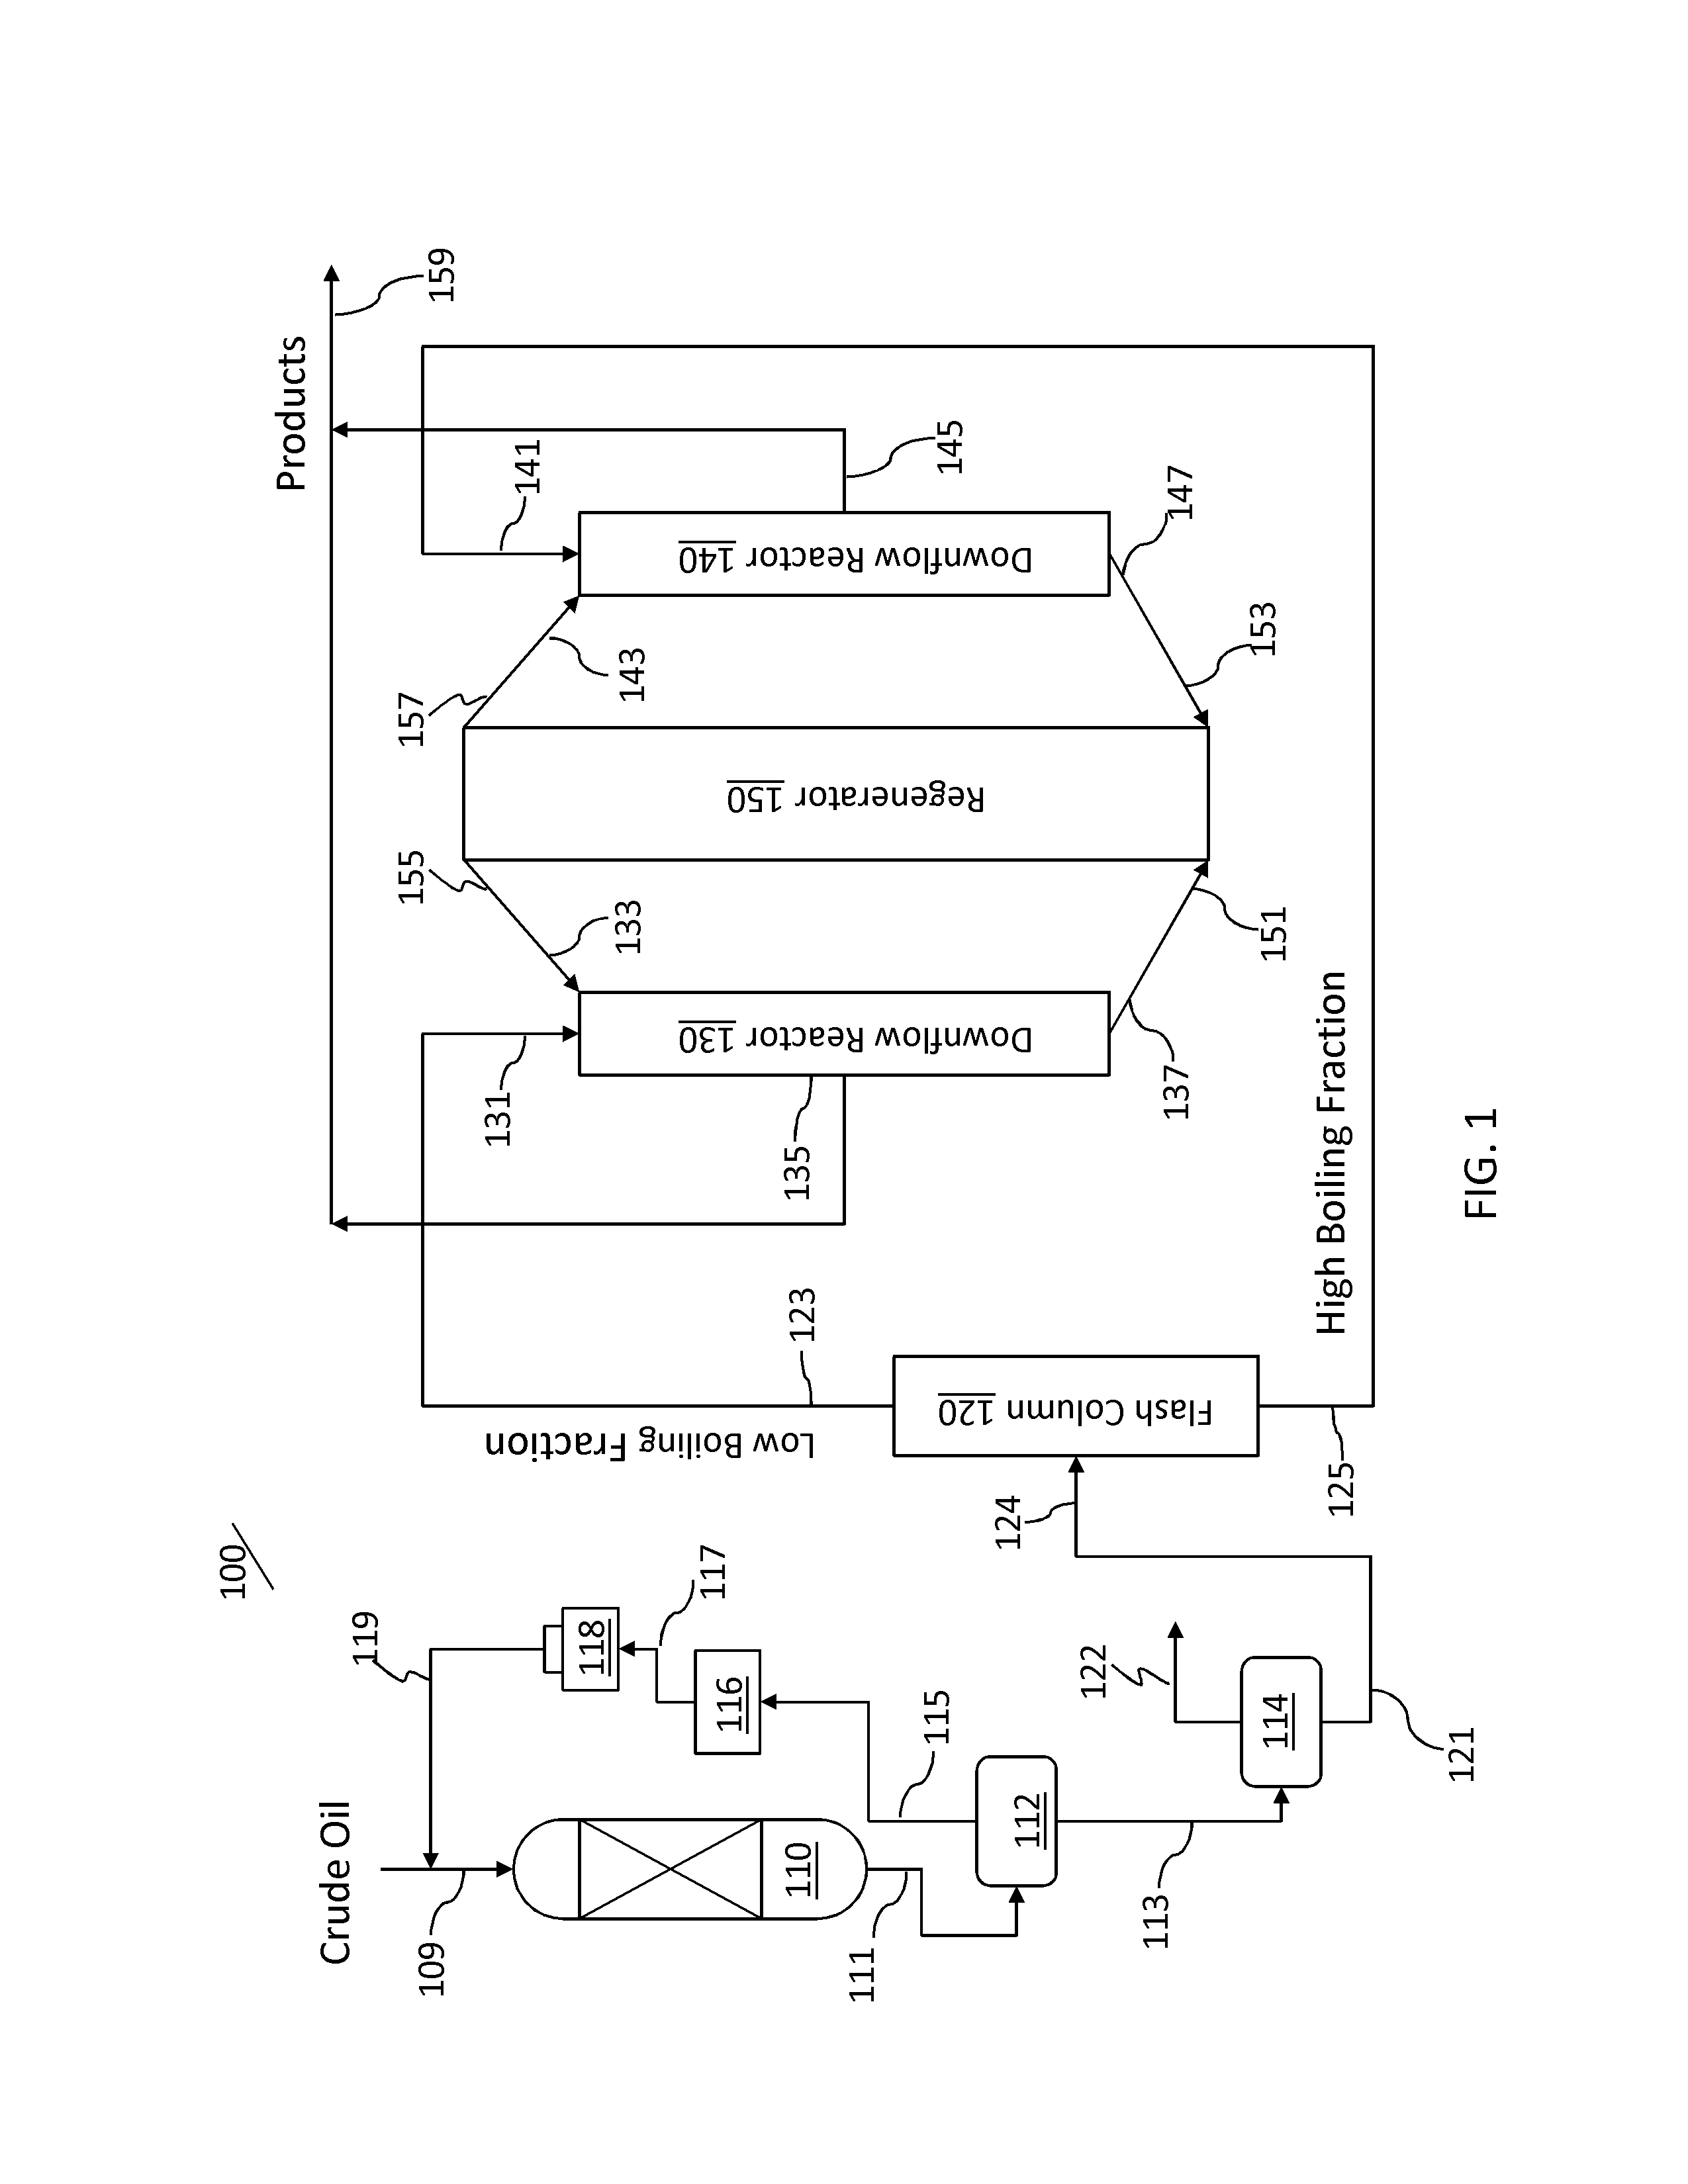 Integrated hydroprocessing and fluid catalytic cracking for processing of a crude oil